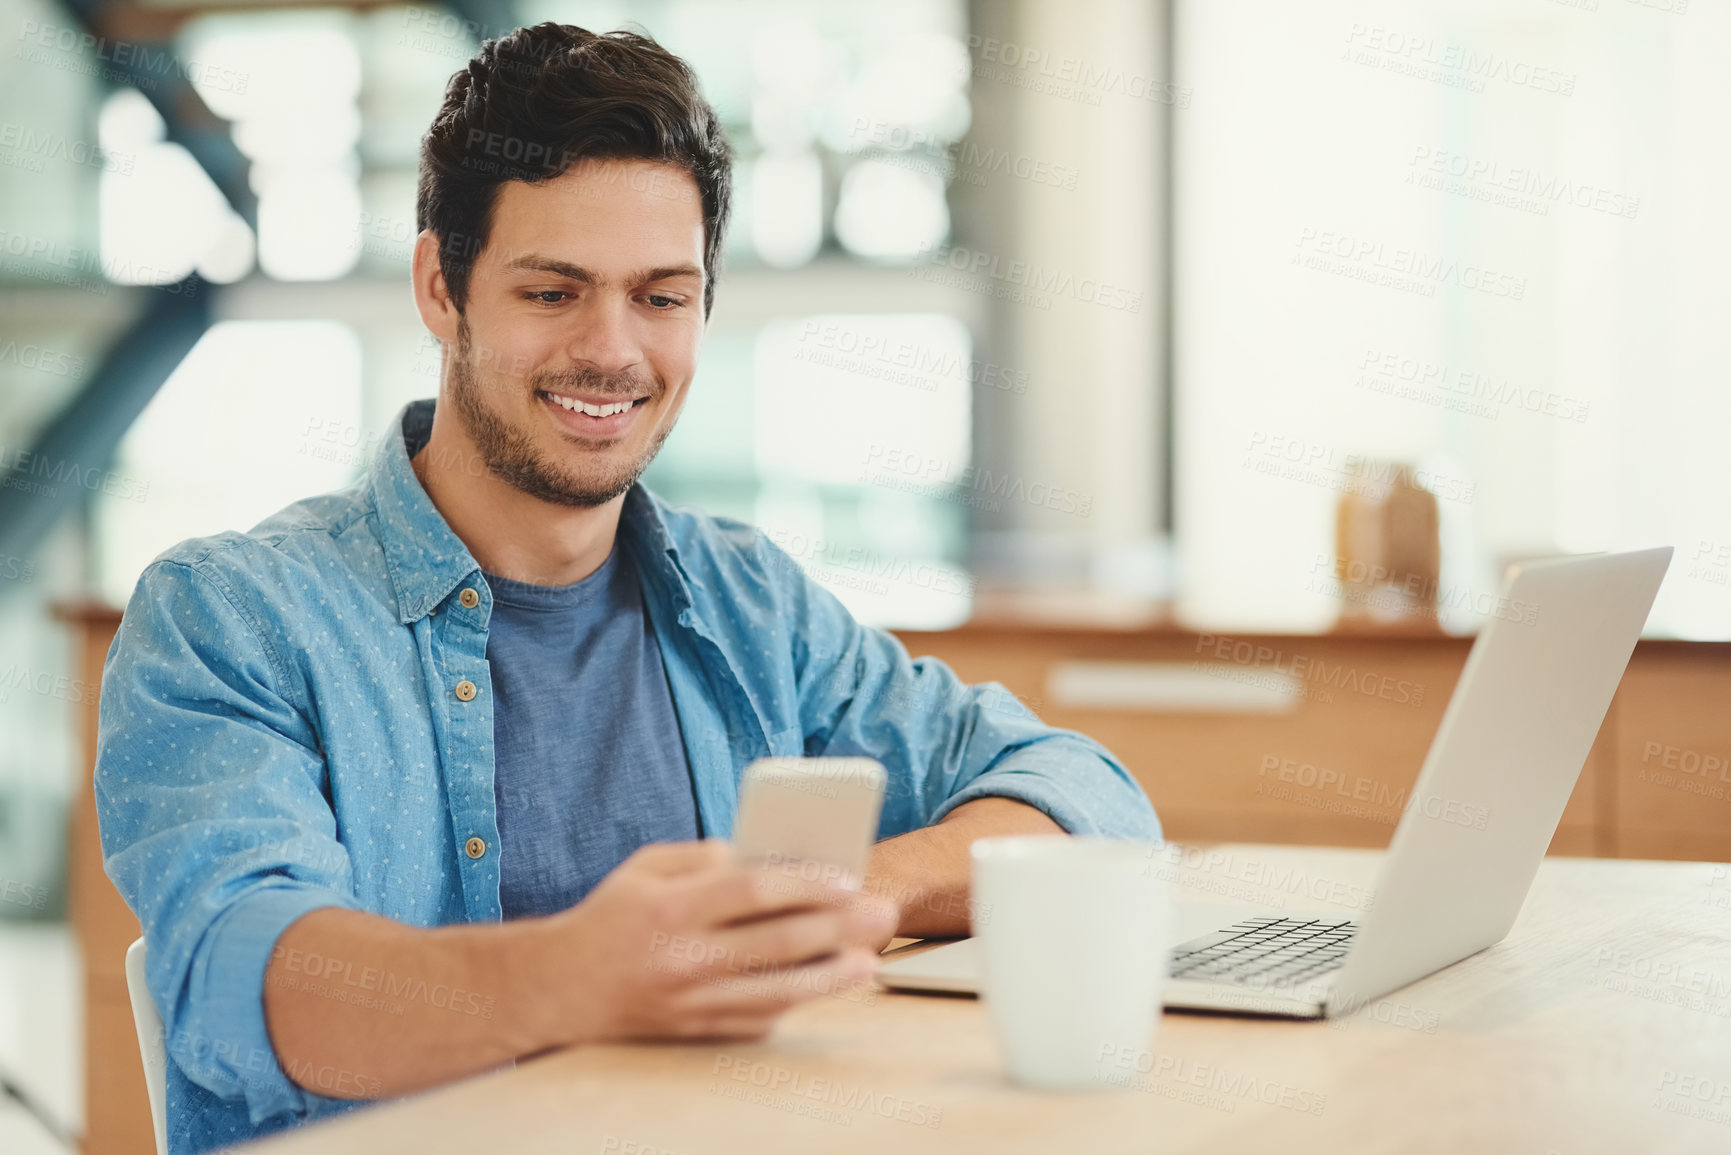 Buy stock photo Shot of a handsome young man using his cellphone and laptop at home